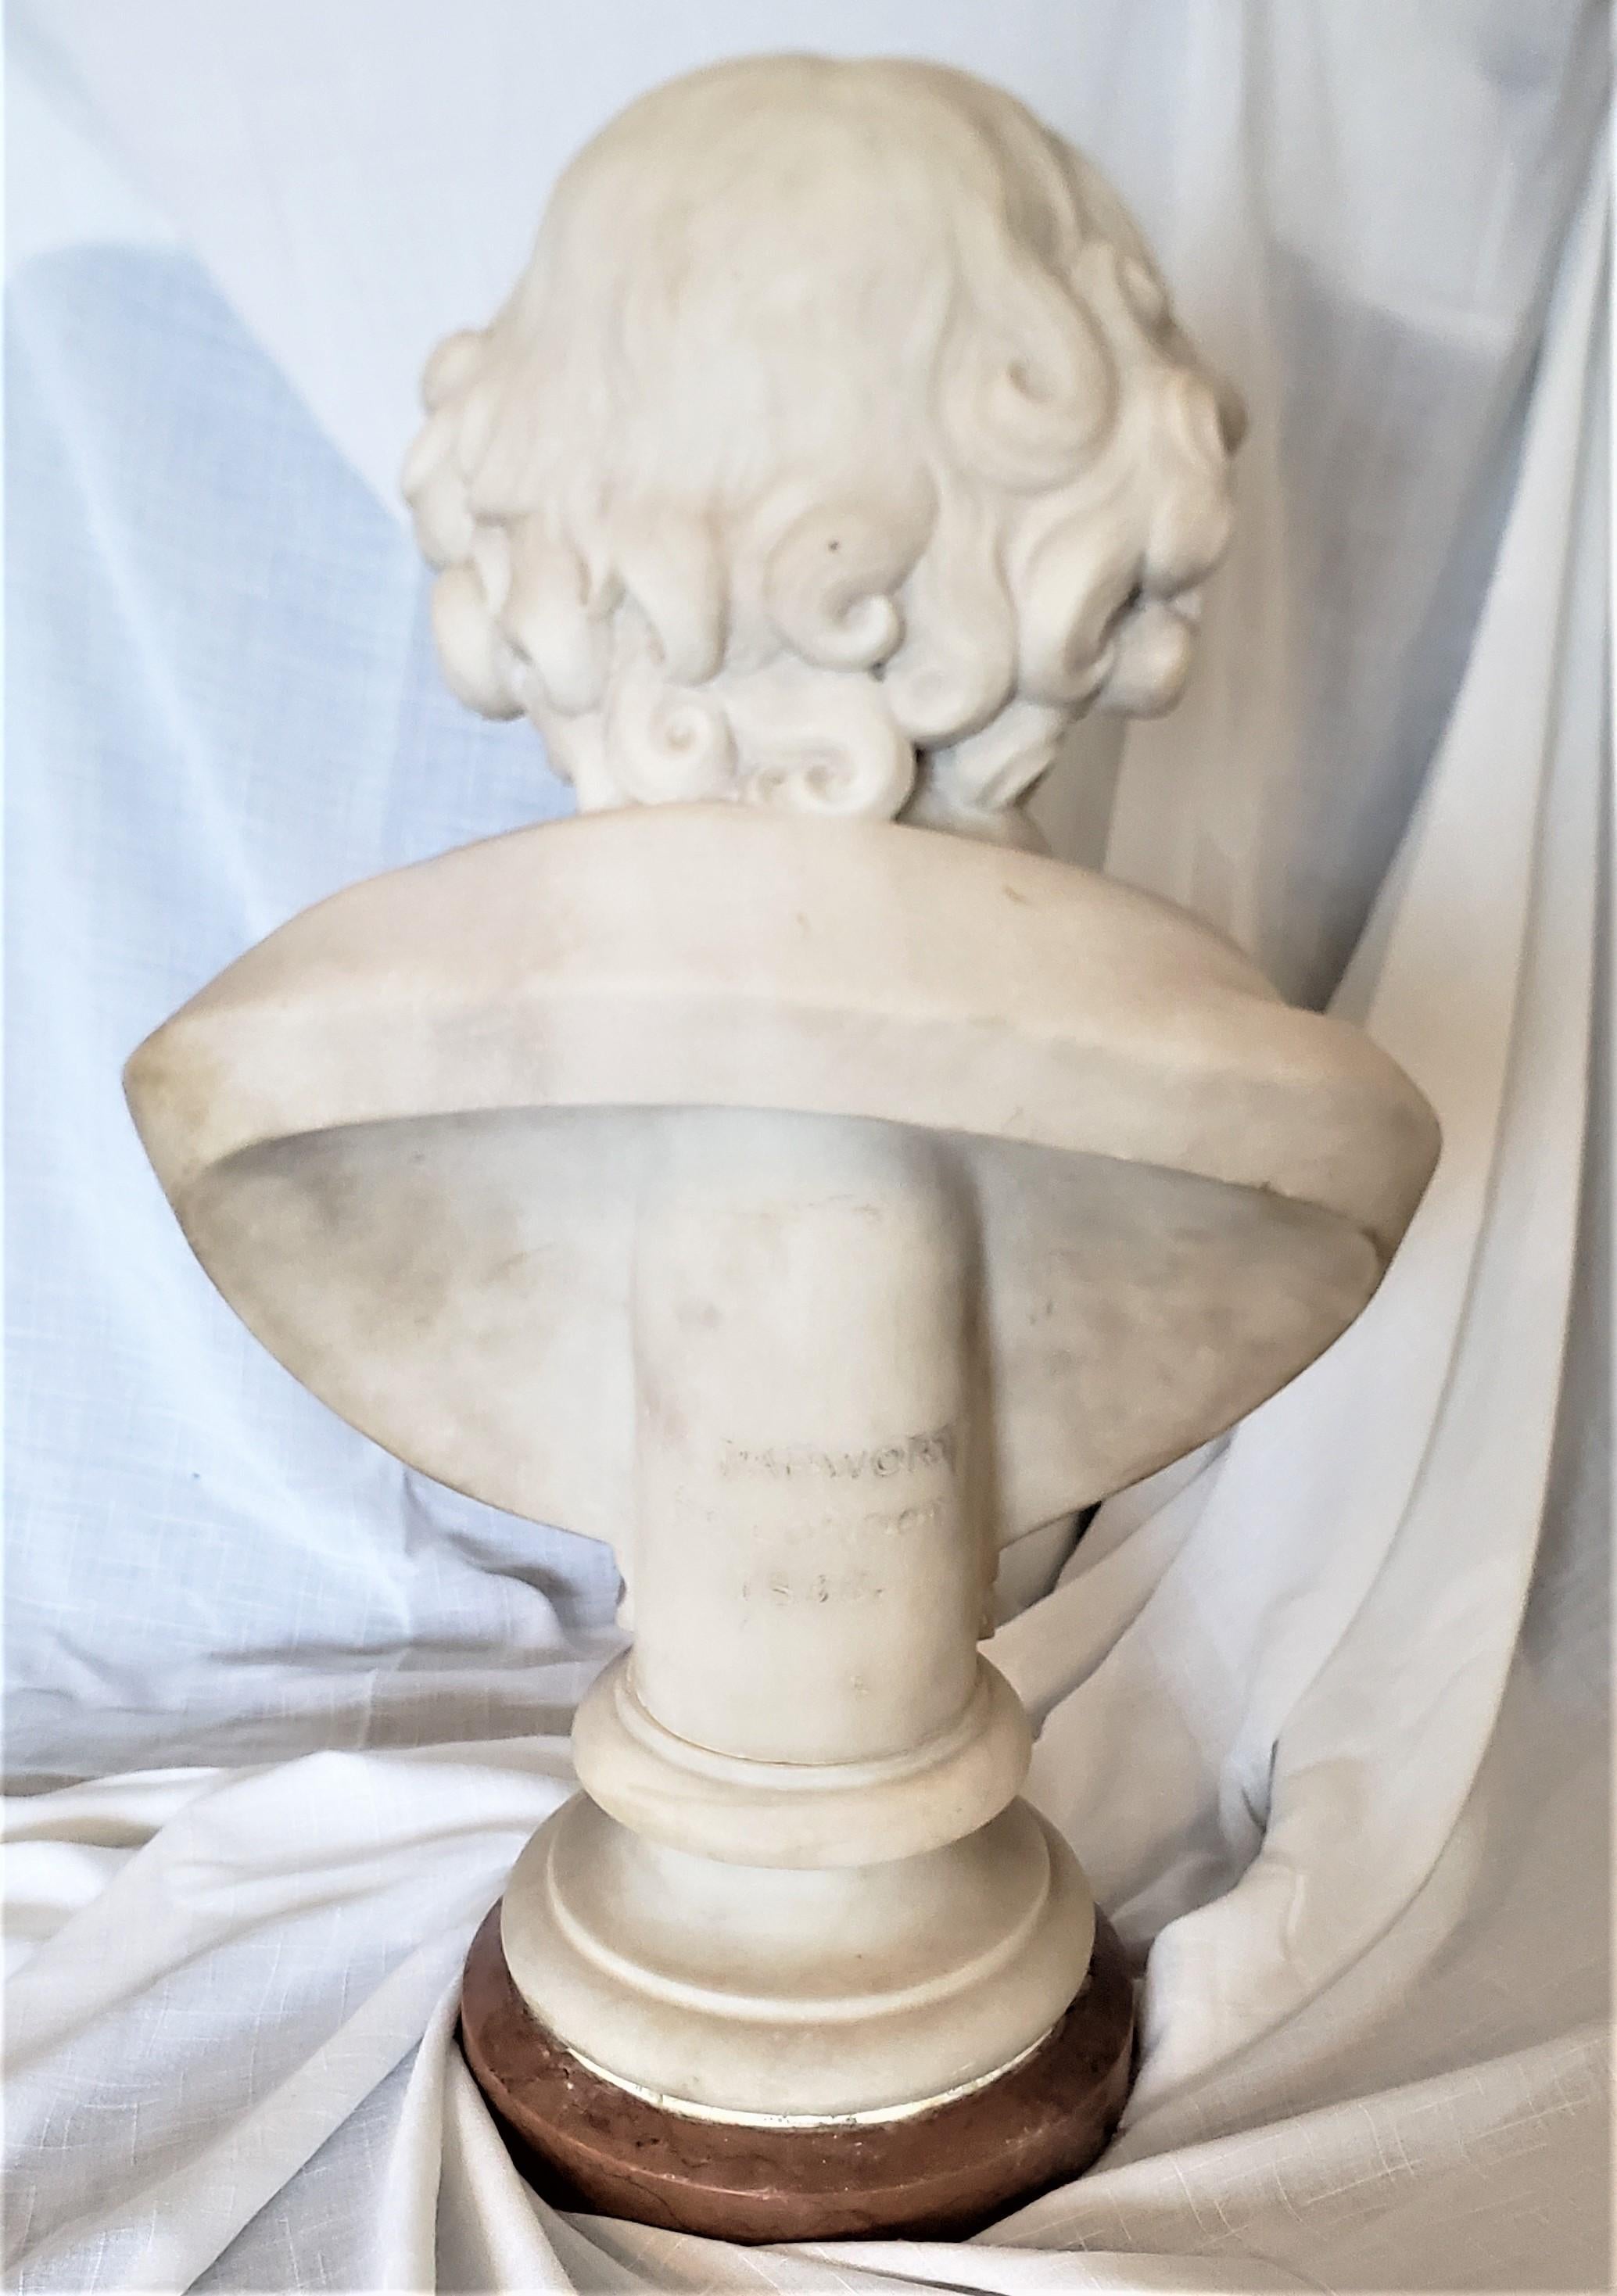 Large Antique English Signed C. Papworth Hand-Carved Marble Bust or Sculpture For Sale 1